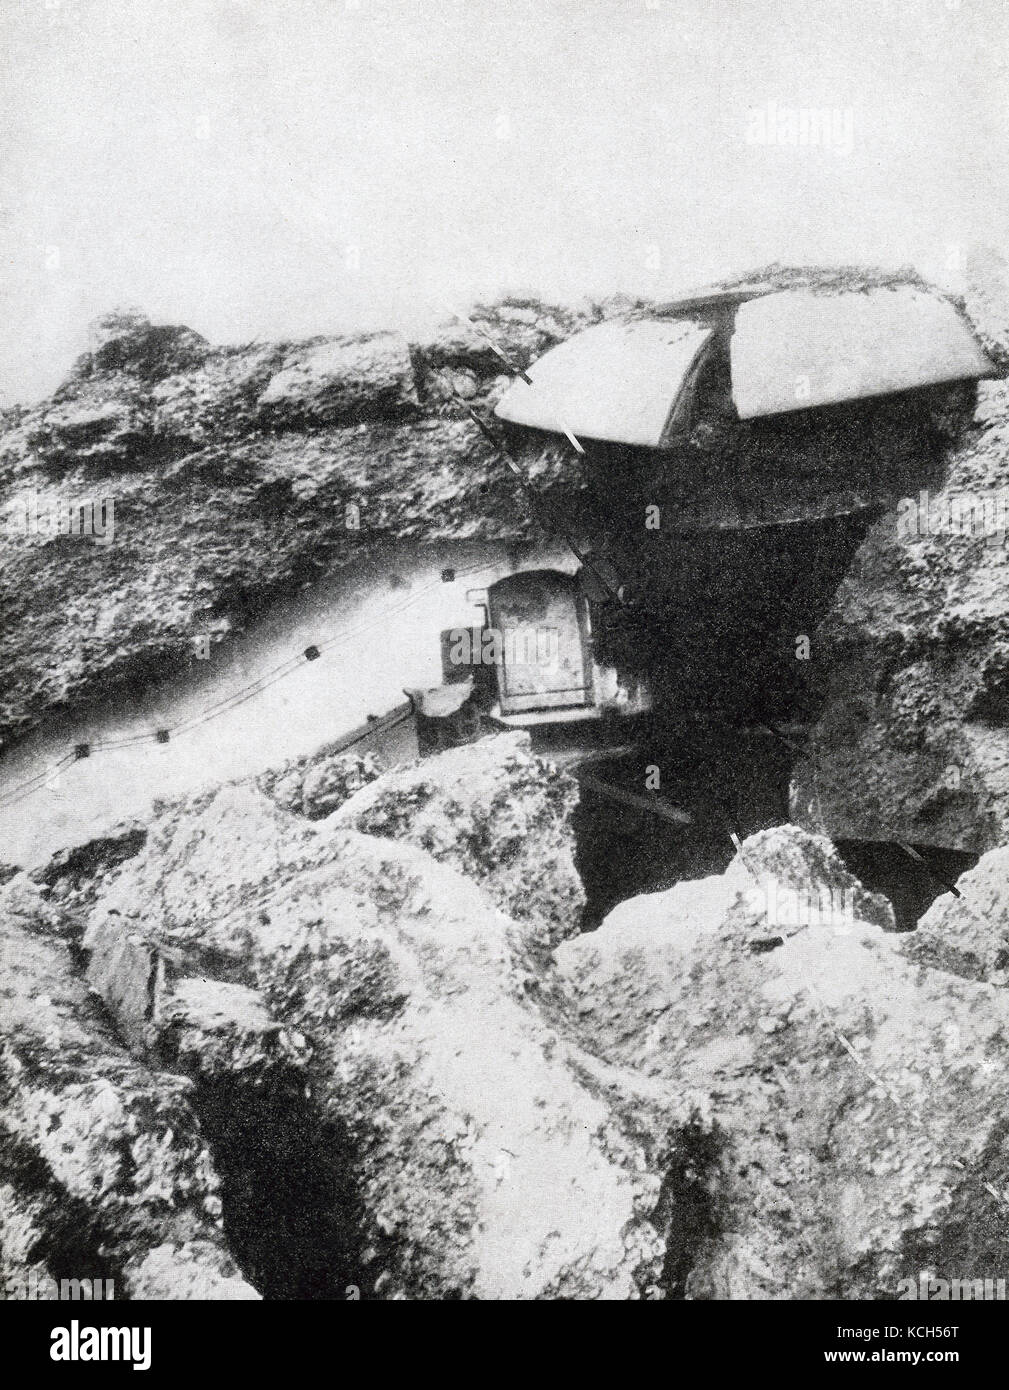 This photo from soon after August 5, 1914, shows a ruined liege fort during World War I. Here a steel turret is shown overthrown and the masonry dmonlished by German siege guns. On August 5, 1914, the German army launched its assault on the city of Liege in Belgium, thereby violating Belgium's neutrality and beginning the first battle of World War I. Stock Photo